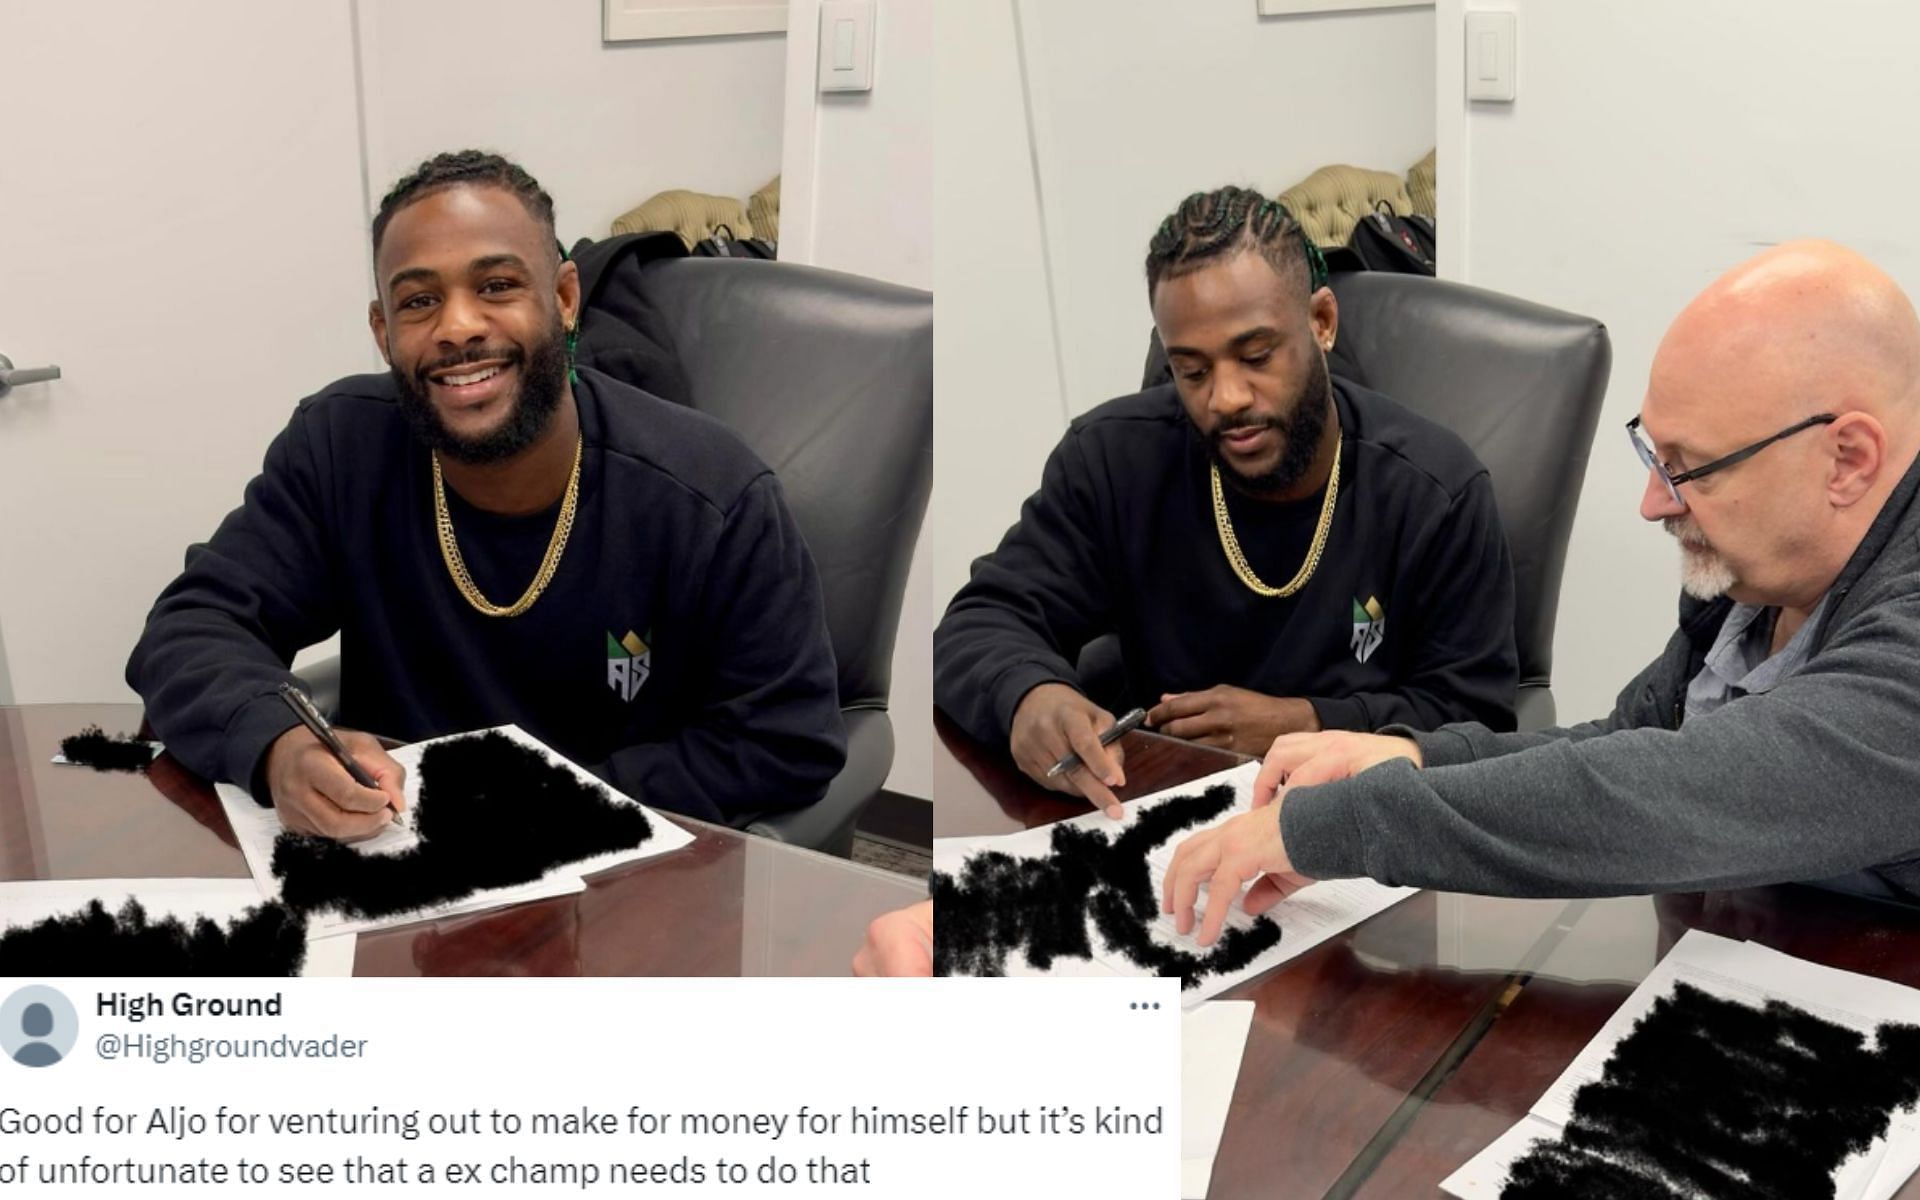 Aljamain Sterling (left and right) serving as a real estate agent surprises fans [Images Courtesy: @funkmastermma on Instagram]